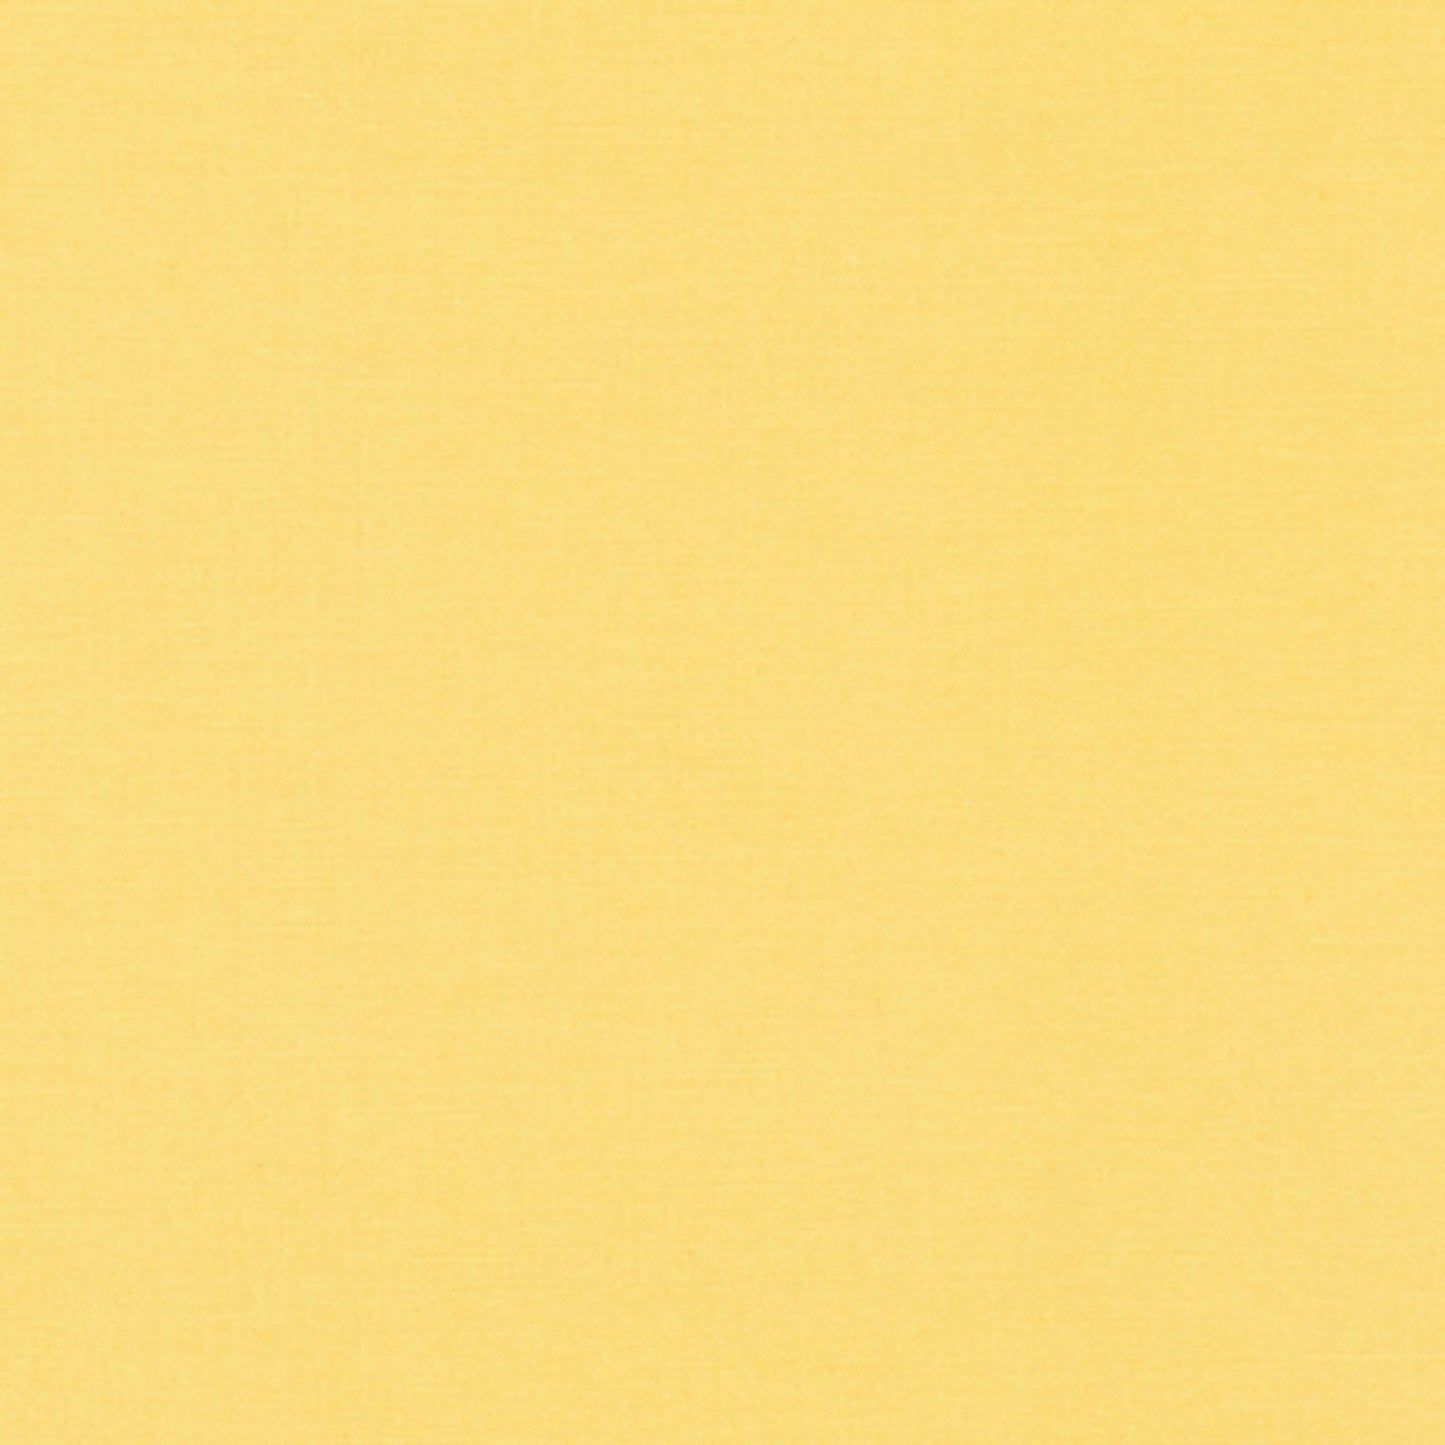 Kona Cotton Solids Buttercup fabric thumbnail image for true color reference